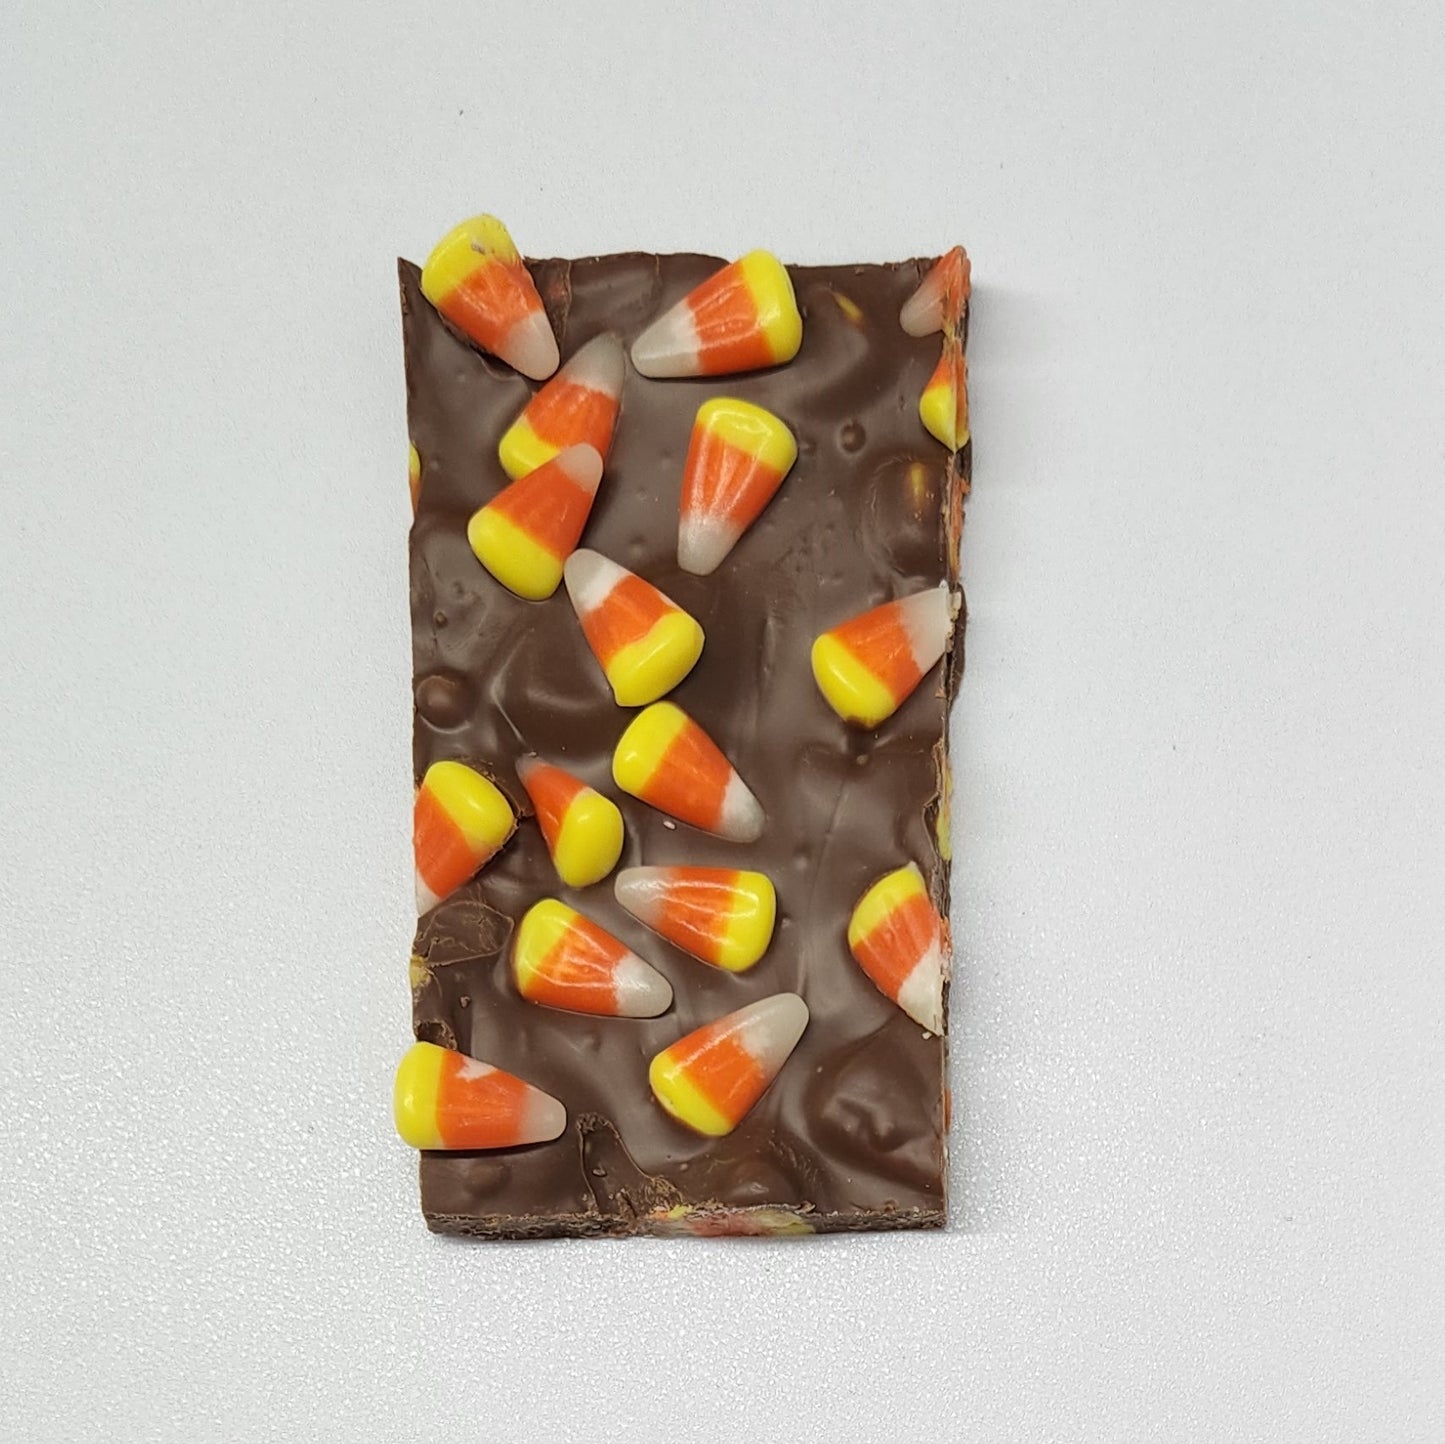 Candy Corn and Milk Chocolate Bark handcrafted by Stage Stop Candy